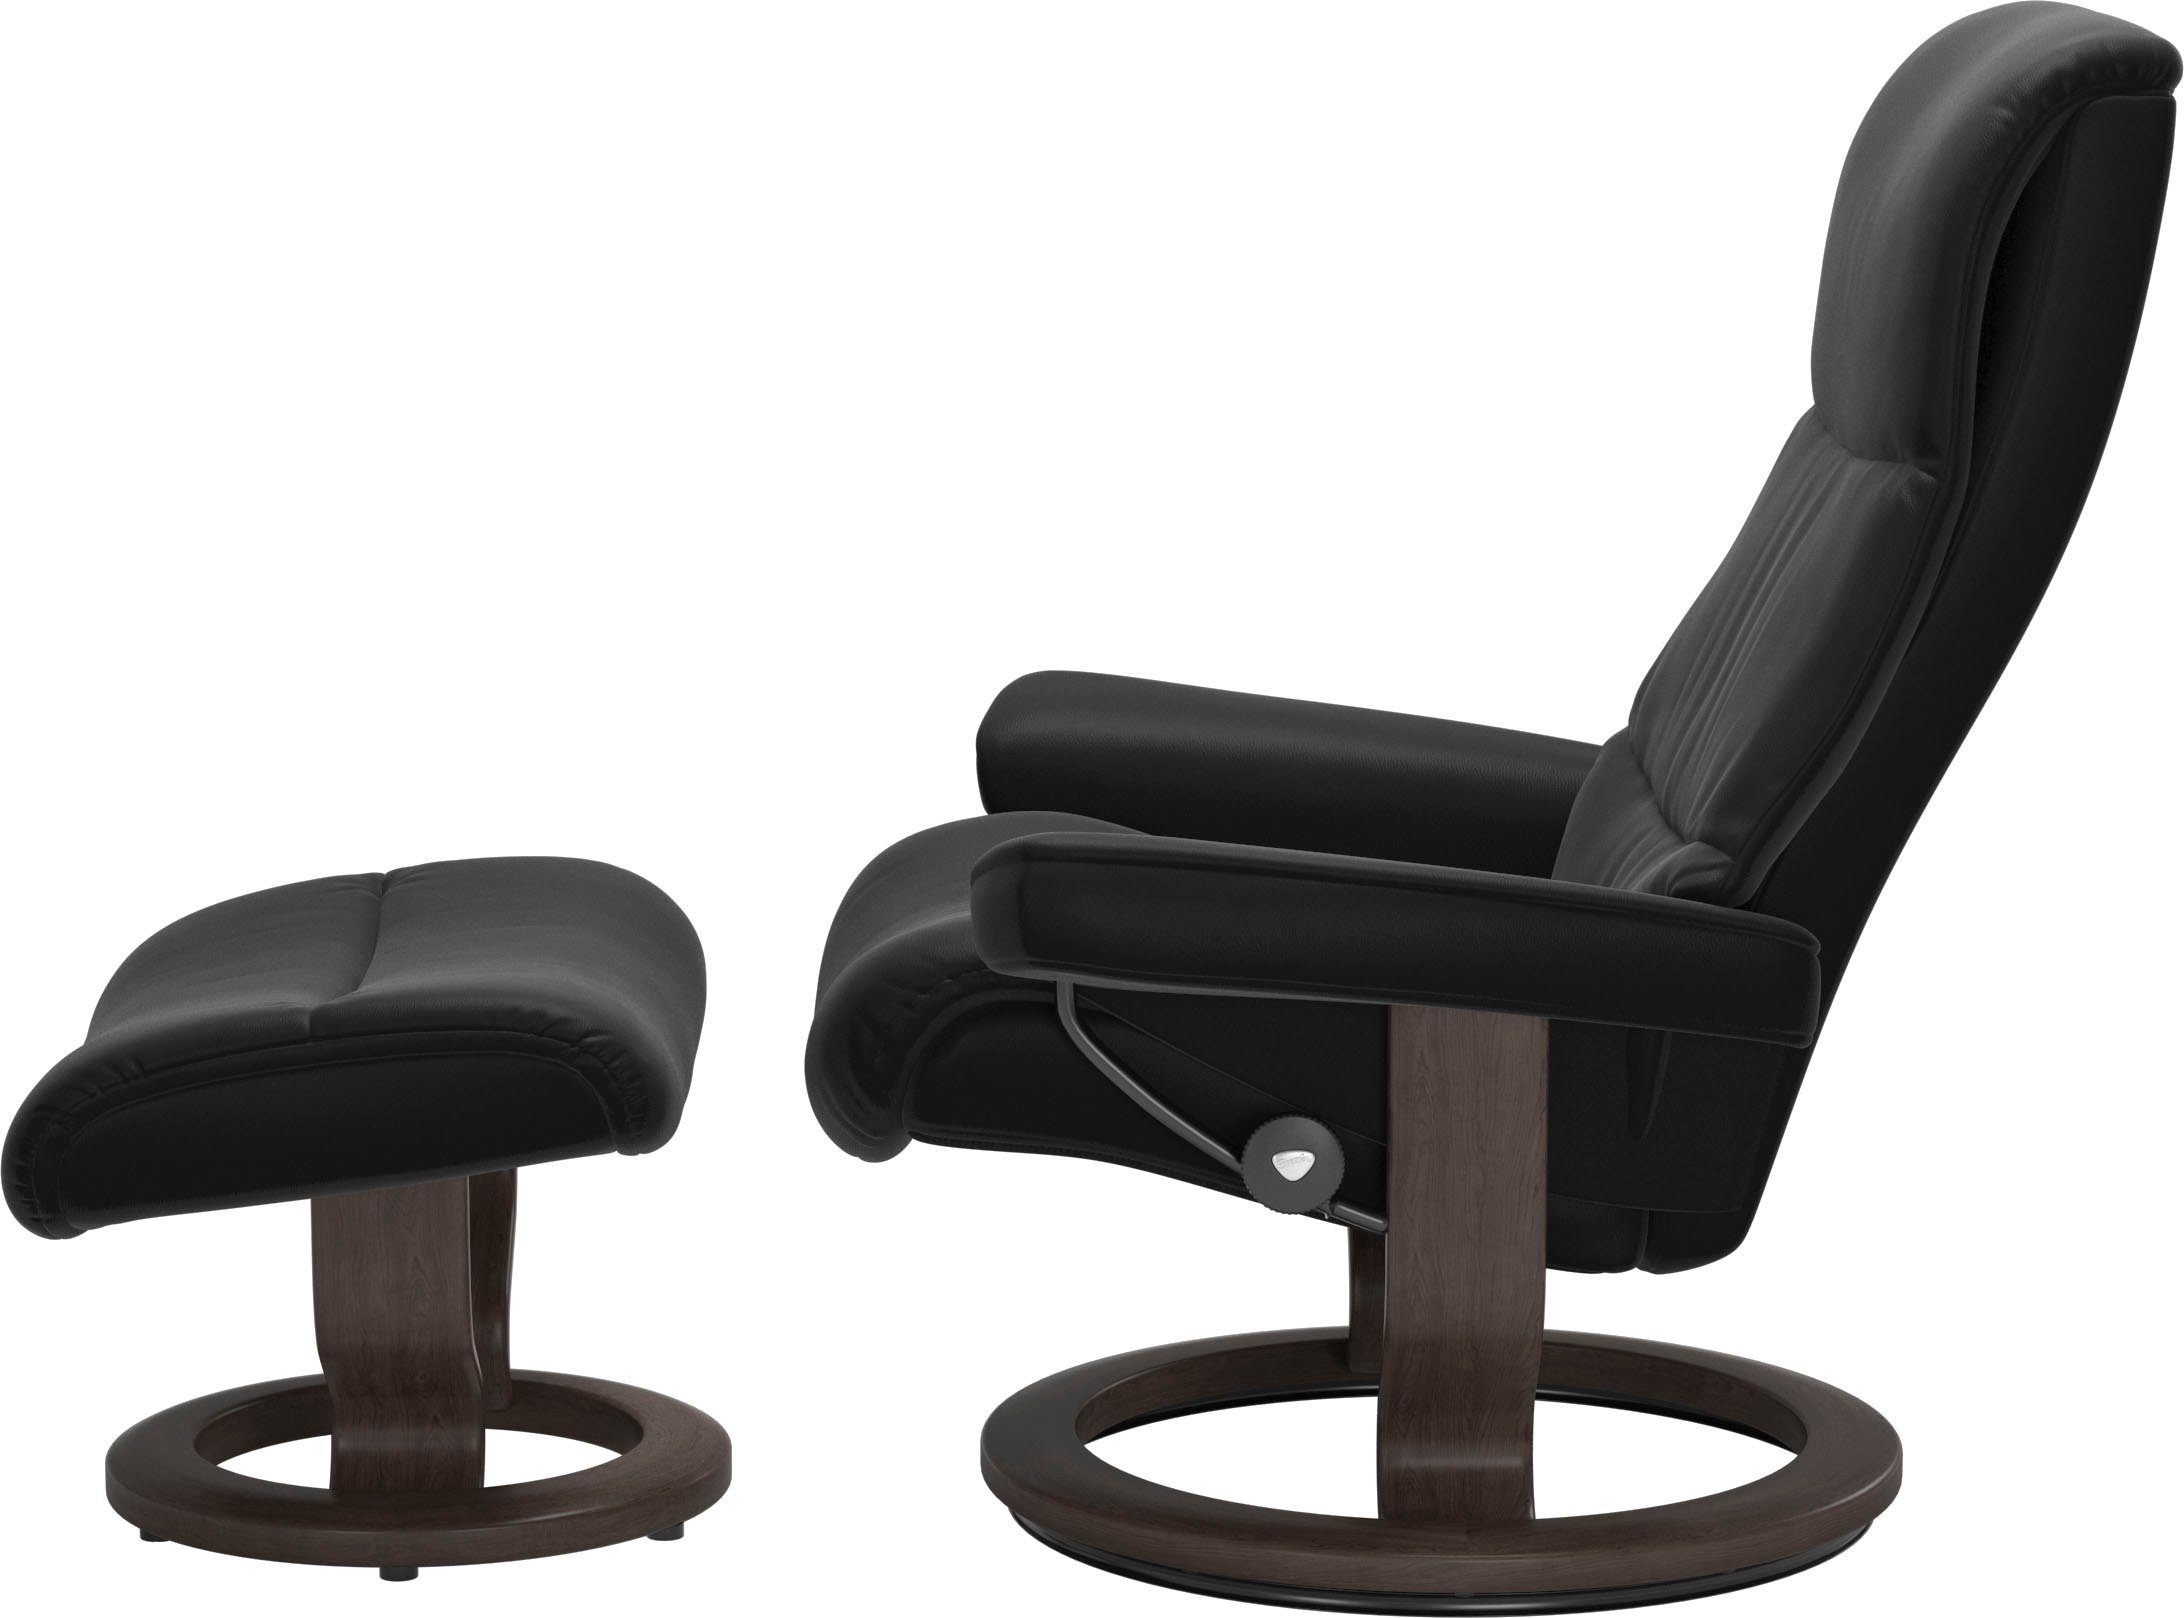 View, Classic Größe Wenge mit Base, Stressless® L,Gestell Relaxsessel